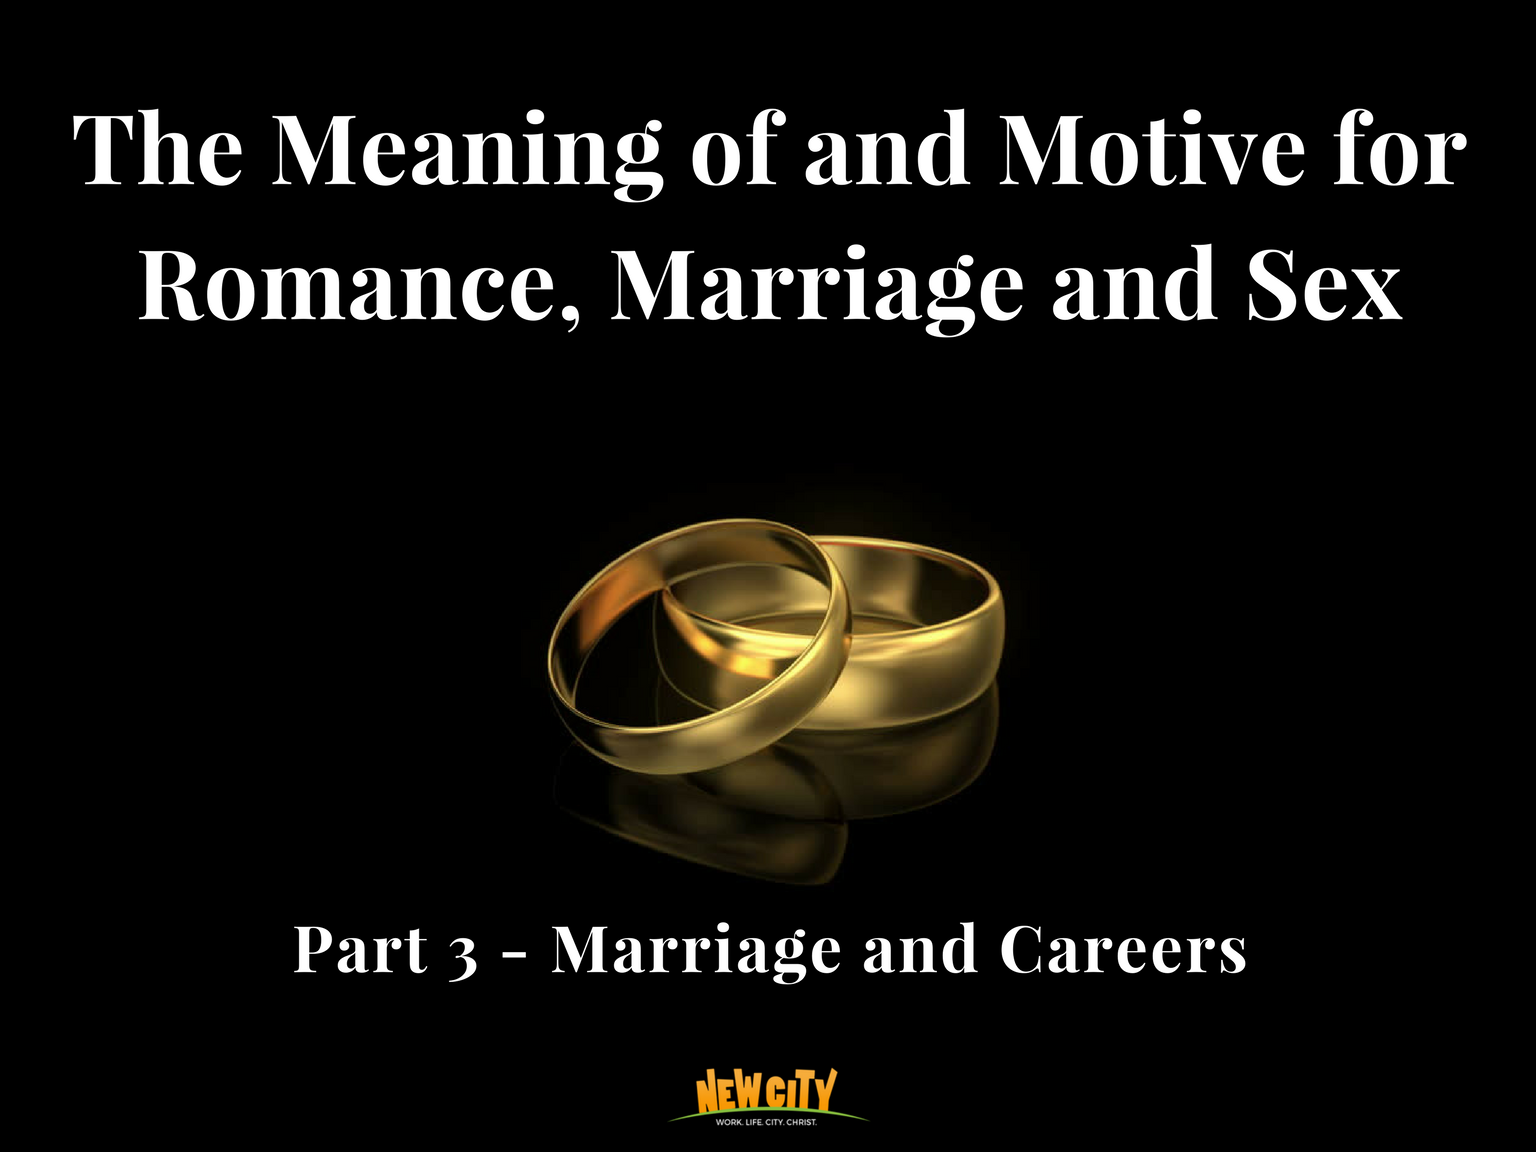 Marriage and Careers  Image